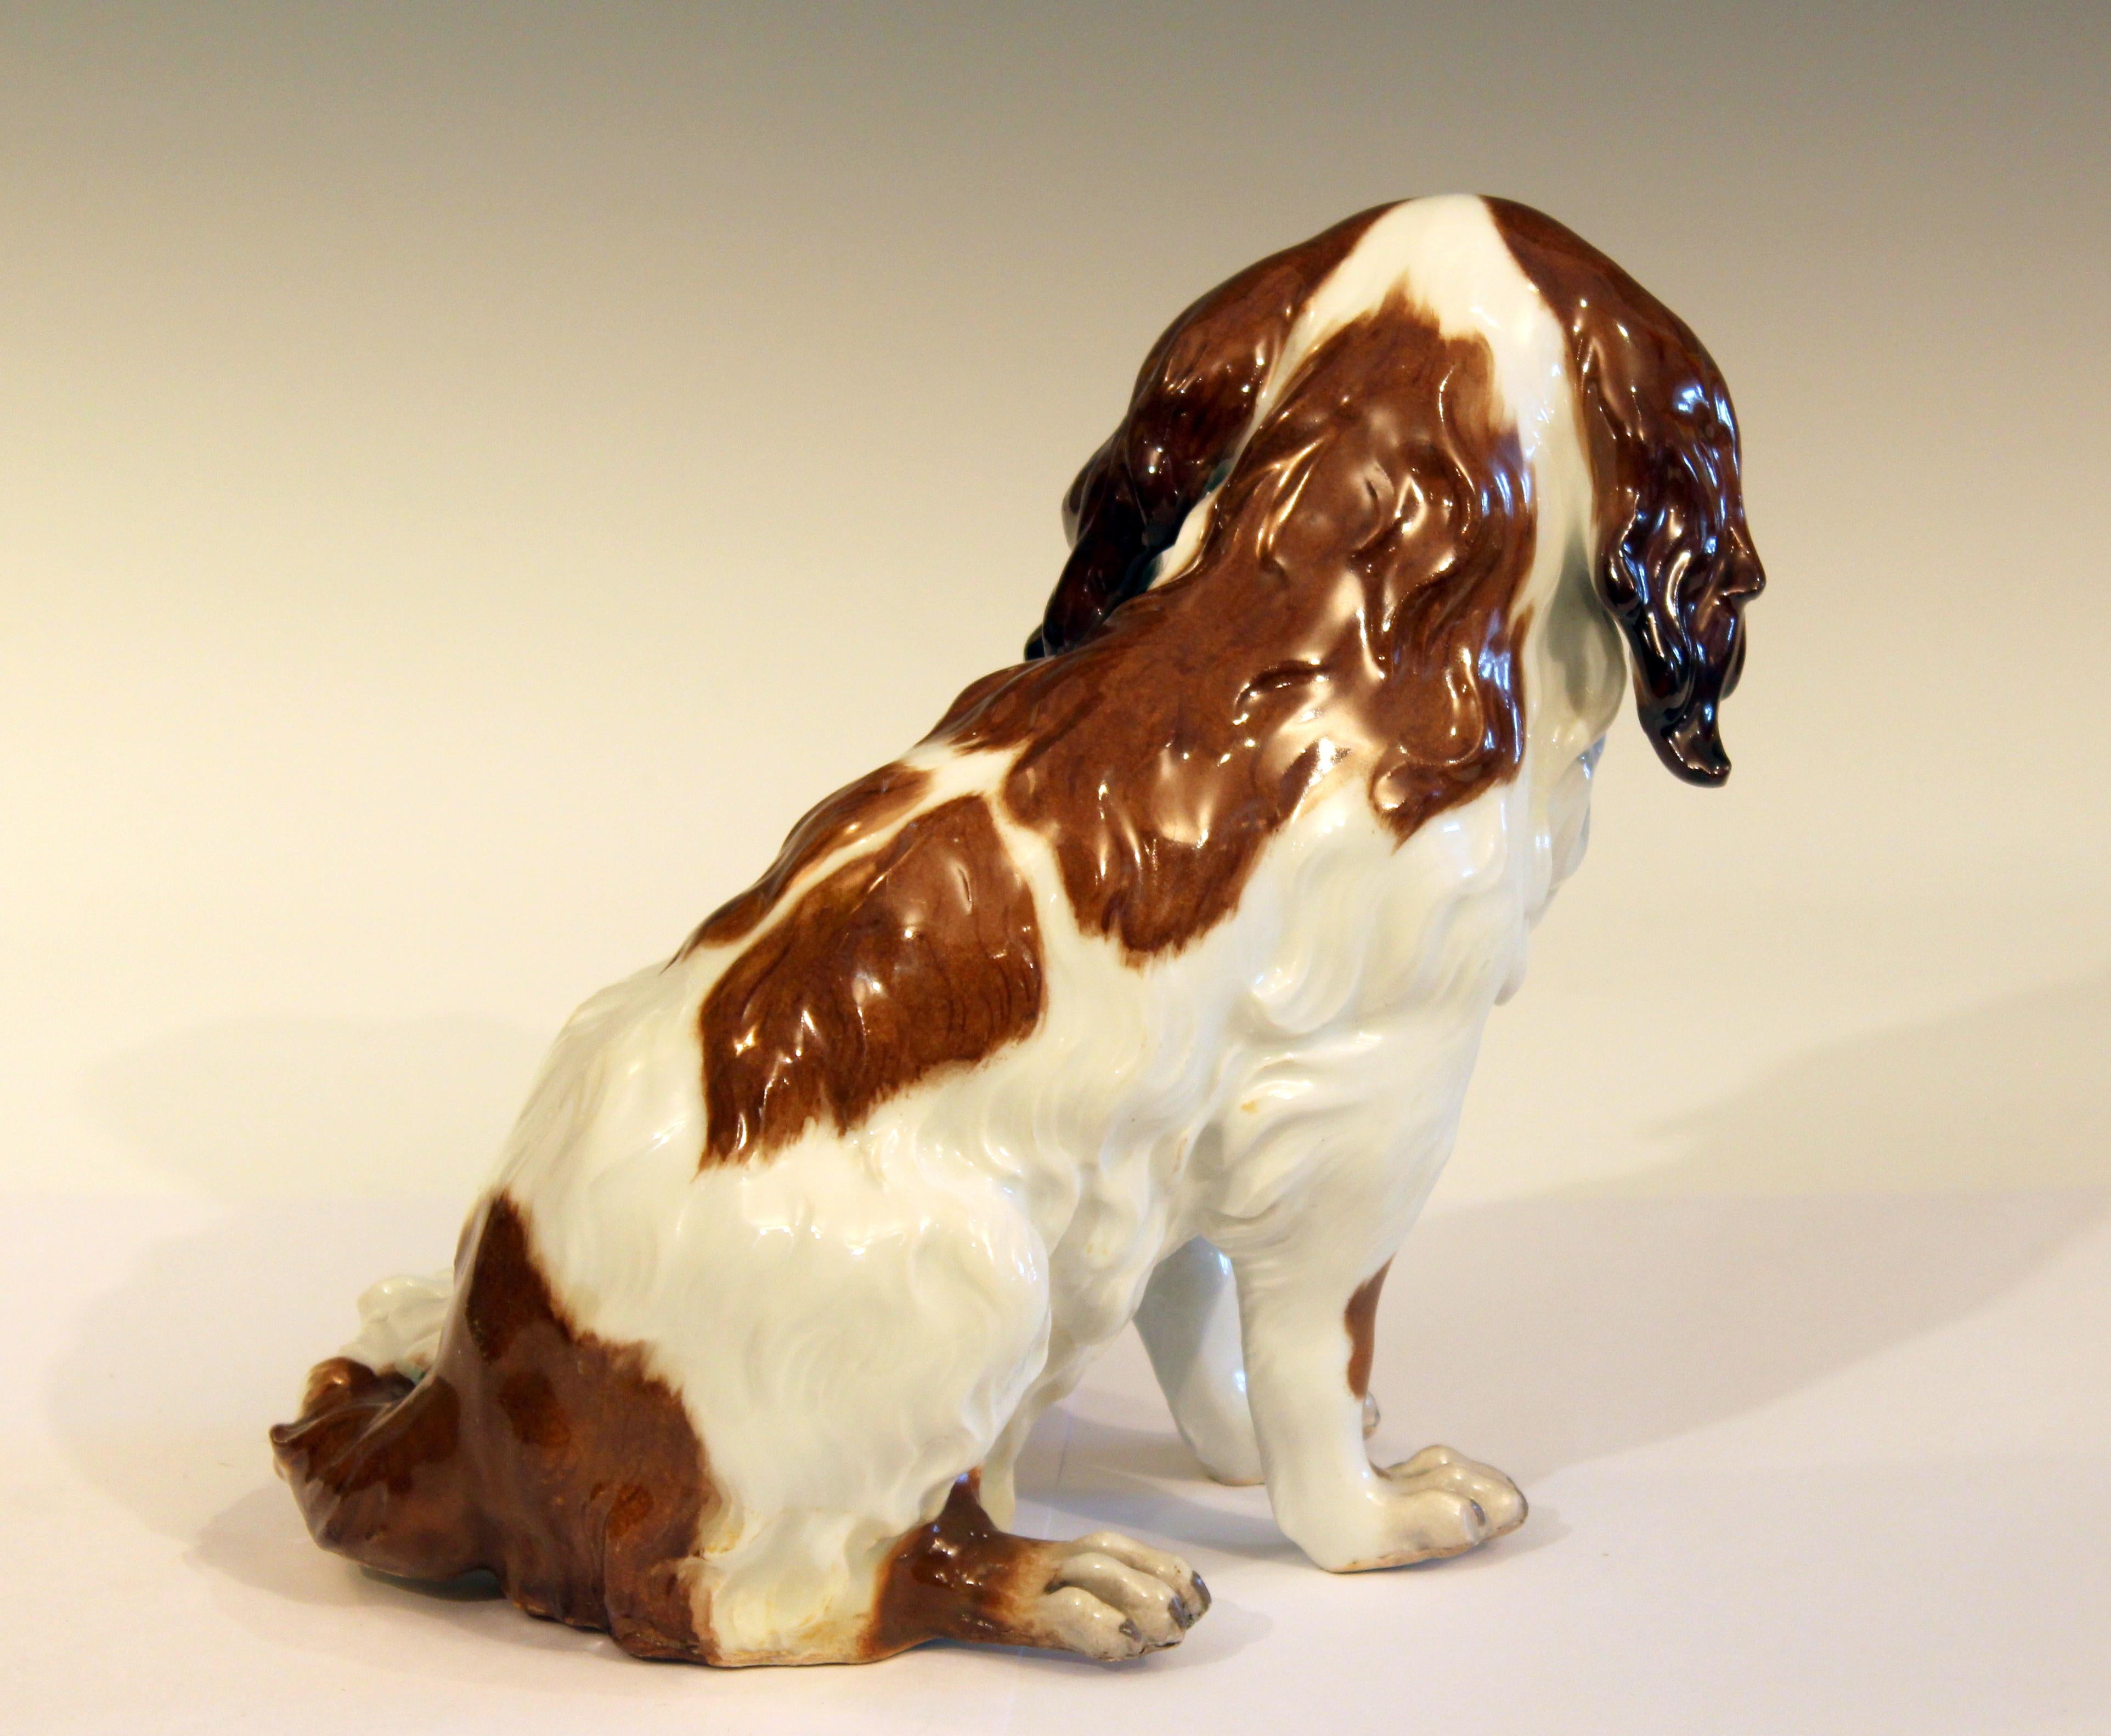 Antique porcelain King Charles Spaniel figurine in Meissen style, possibly by the French copyist, Samson, circa late 19th-early 20th century. Measures: 8